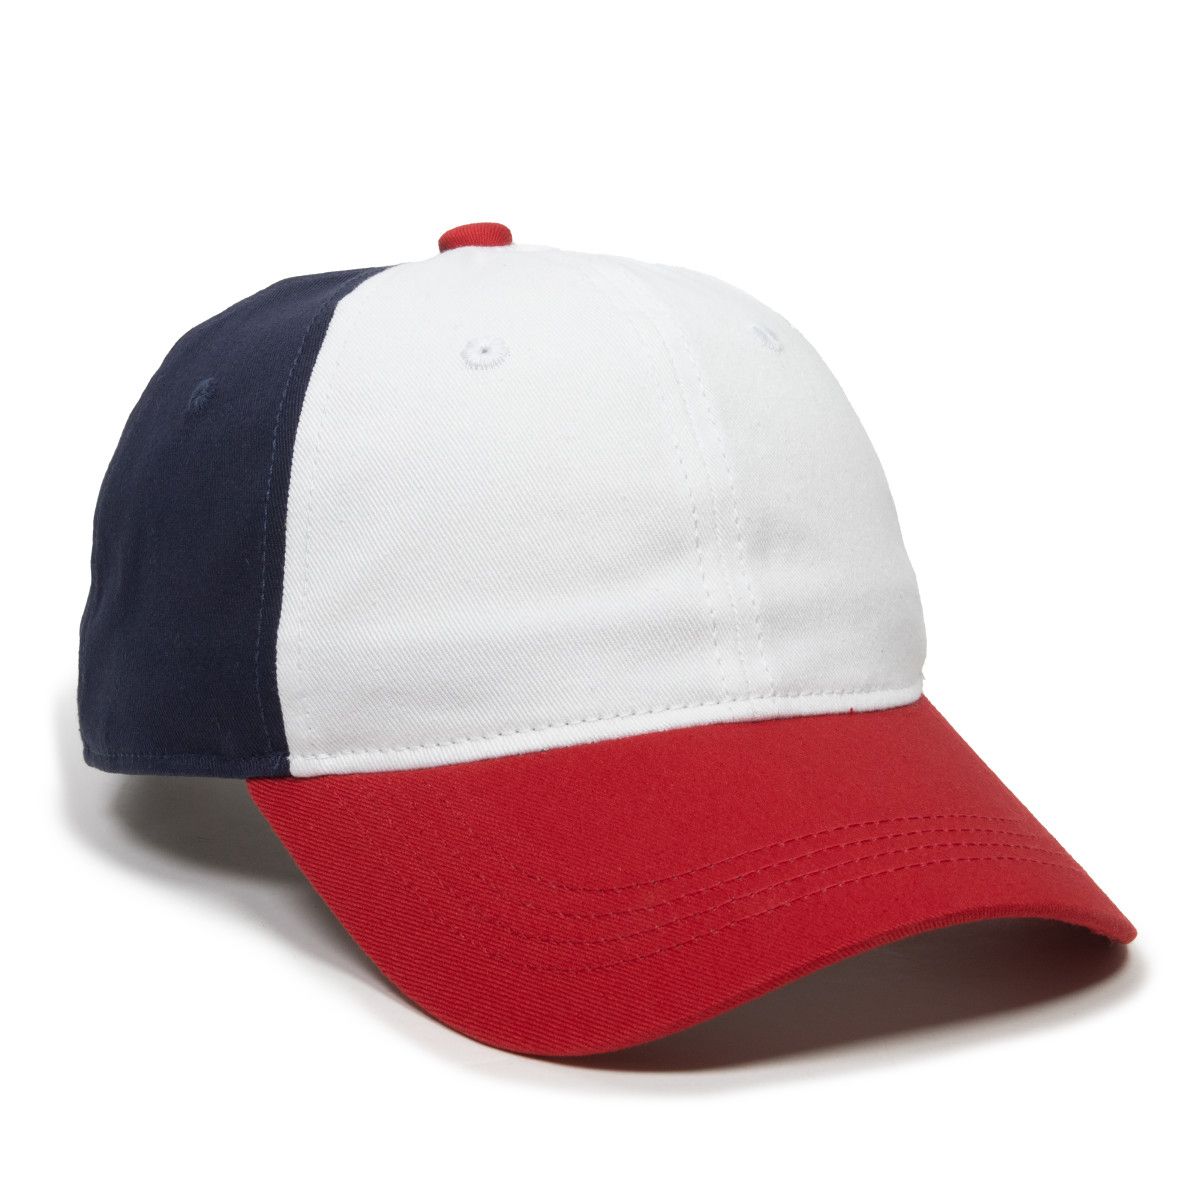 Unstructured Washed Twill Baseball Hat - Sport-Smart.com